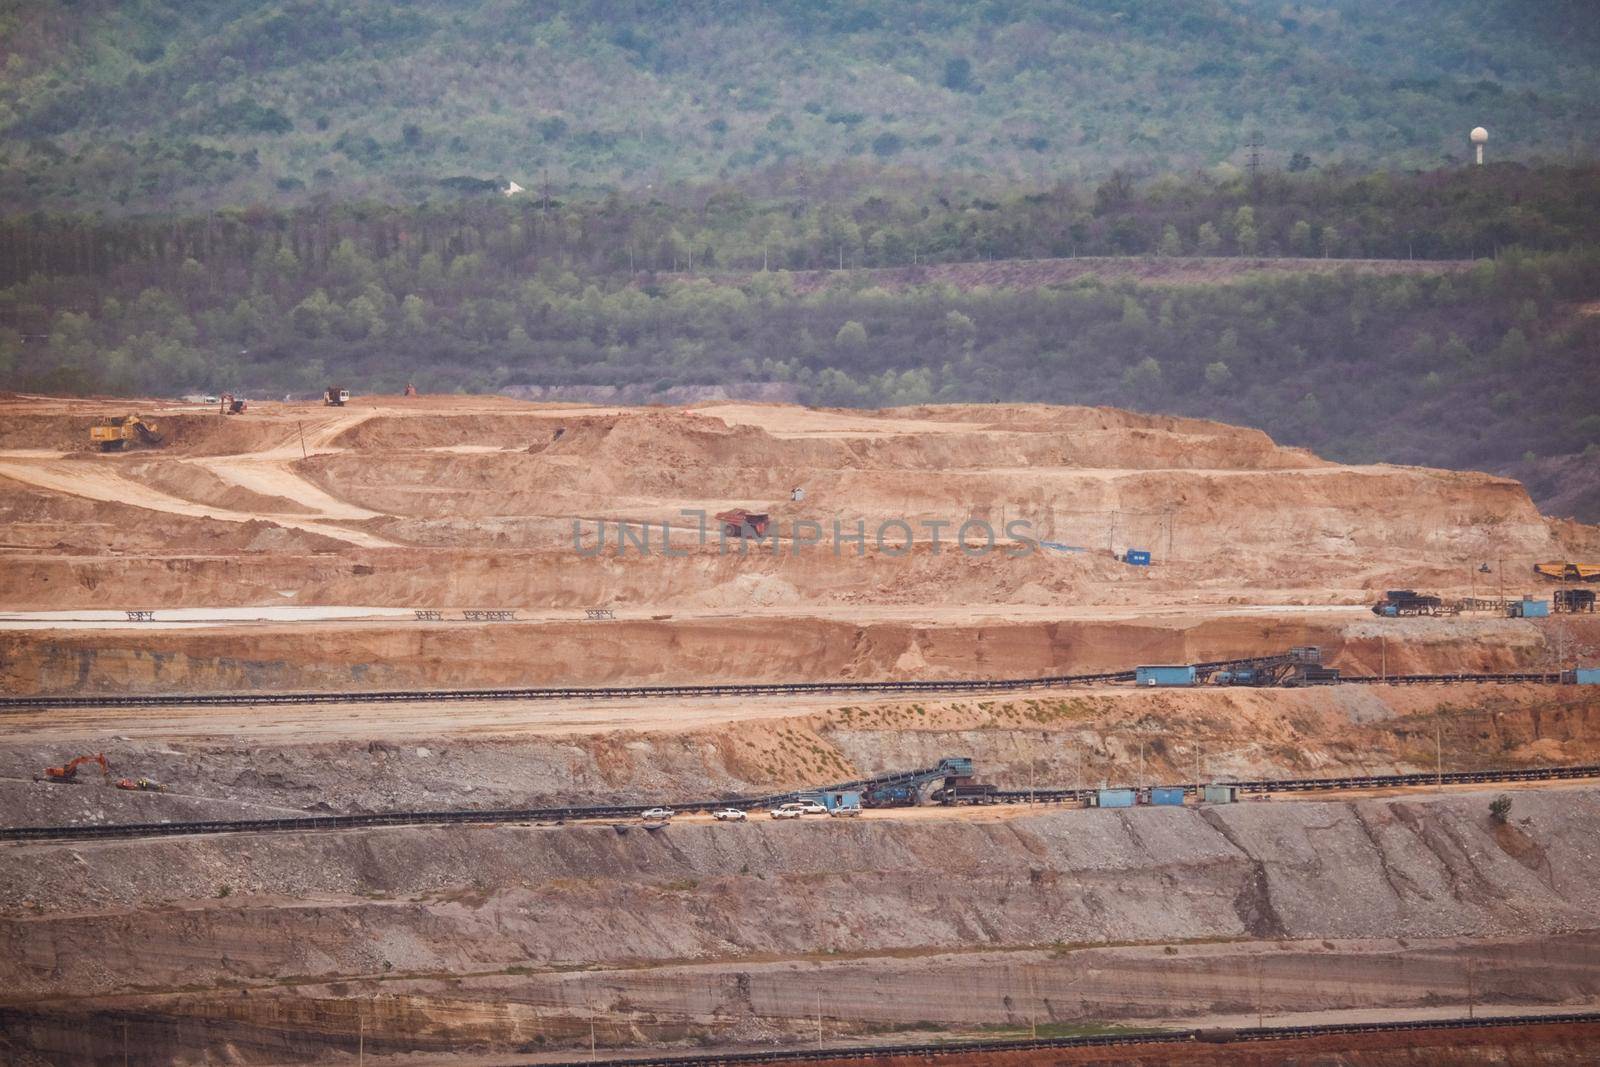 View of Trucks and excavators work in open pits in lignite coal mines. Lignite Coal Extraction Industry. The famous outdoor learning center of Mae Moh Mine Park, Lampang, Thailand.